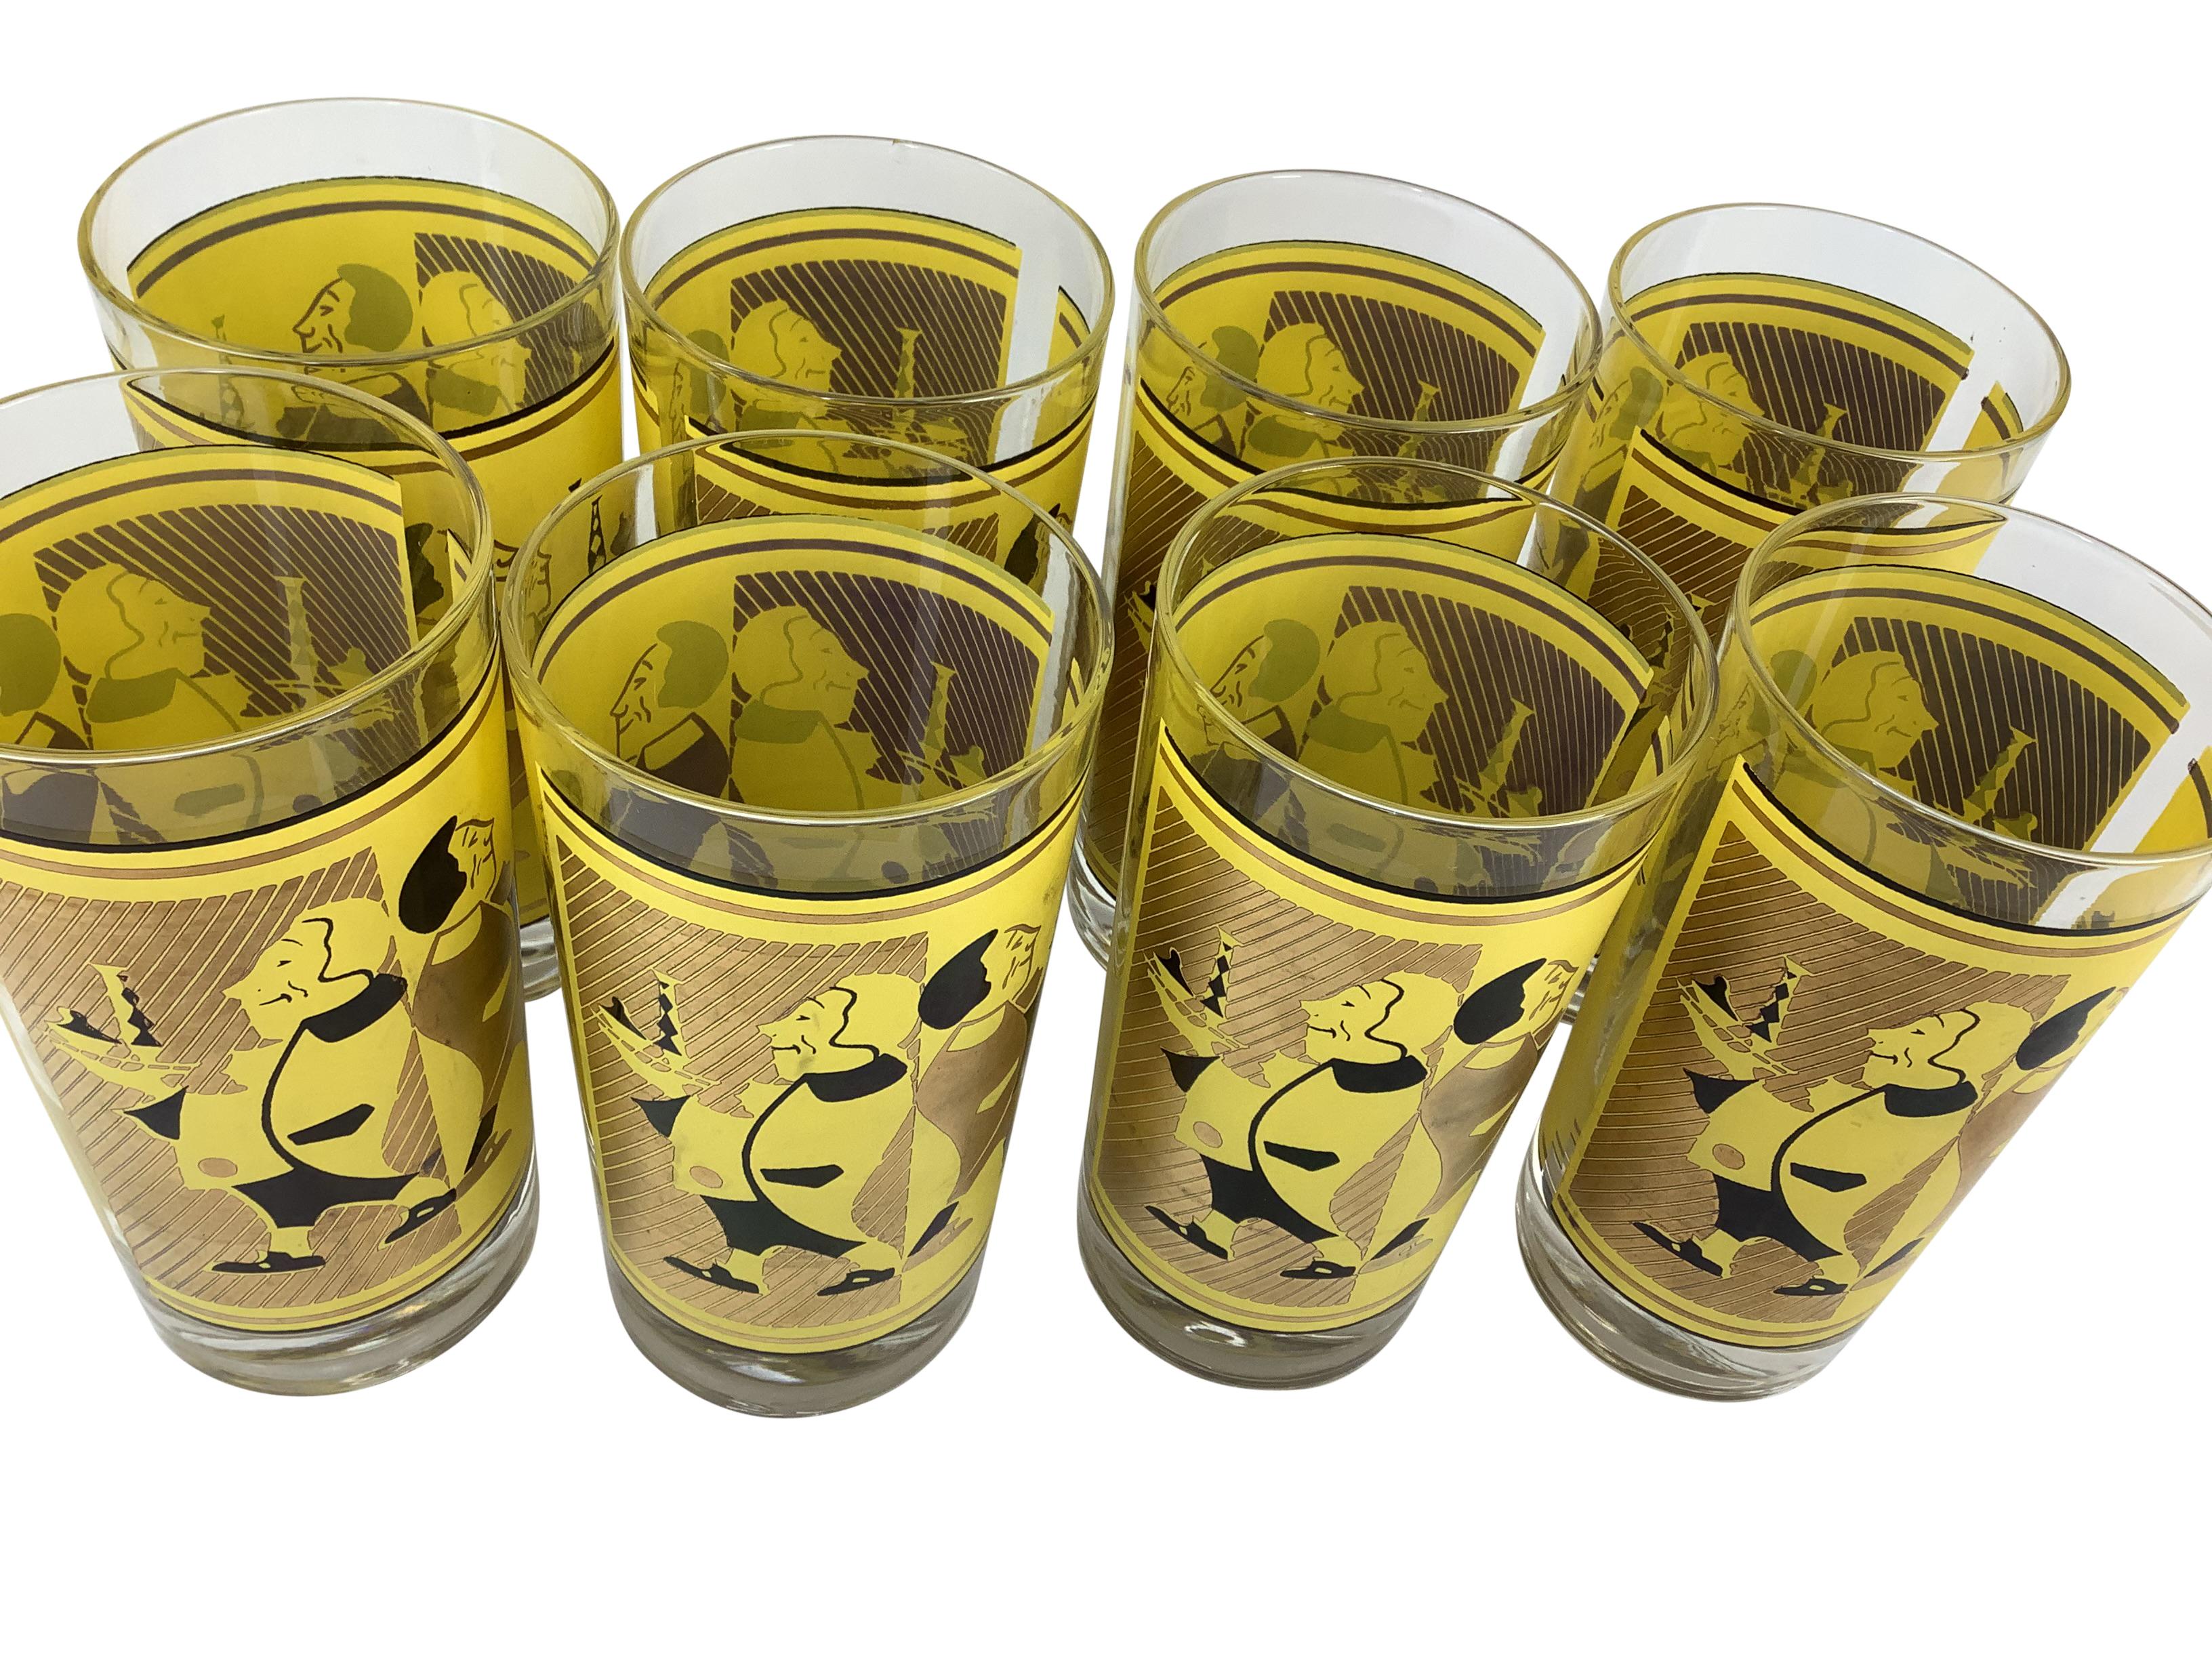 American Vintage Yellow Gold and Black Highball Glasses With Serving Waiters - Set of 8 For Sale